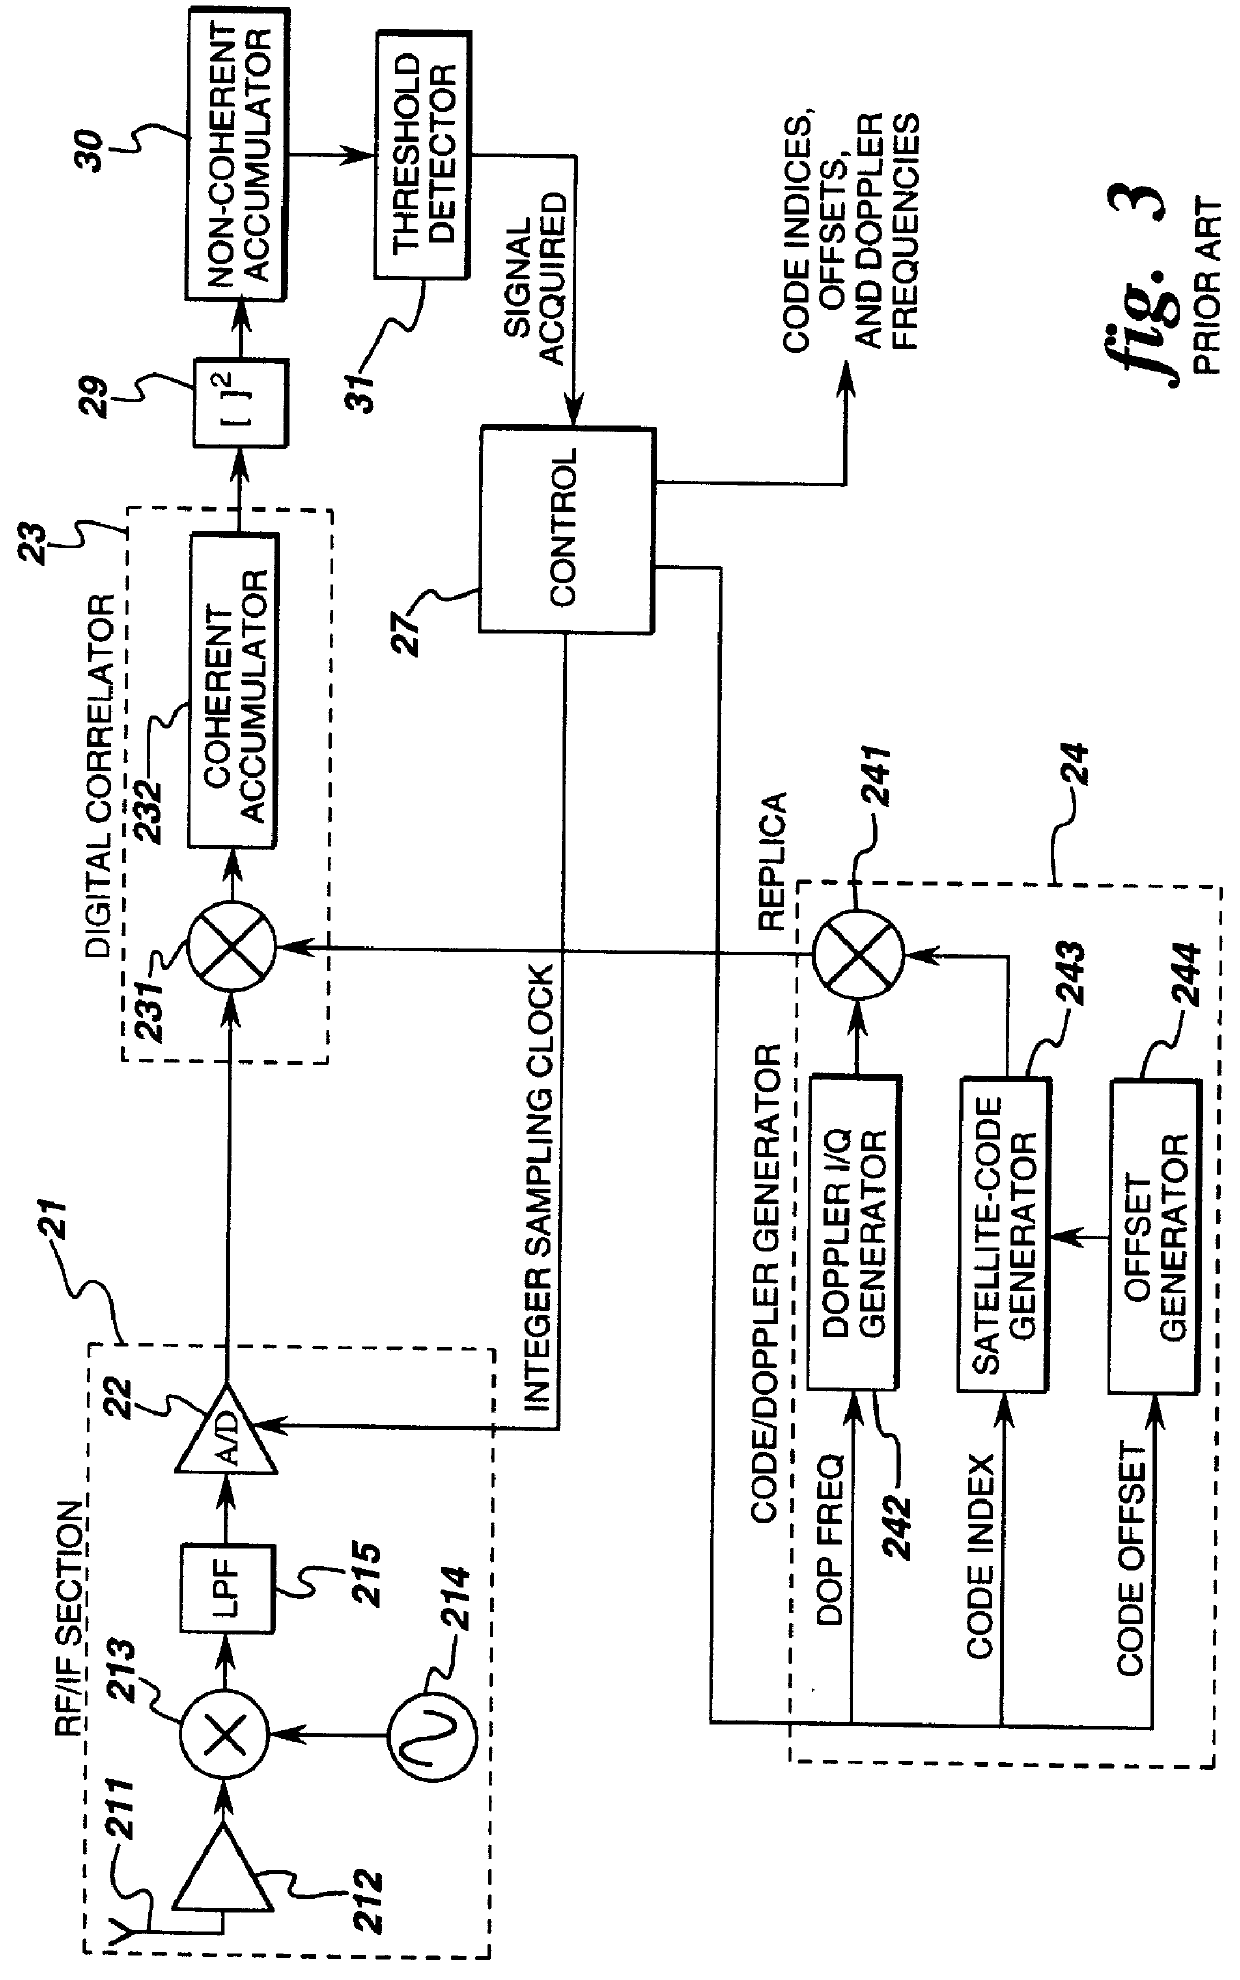 Low power signal processing for spread spectrum receivers